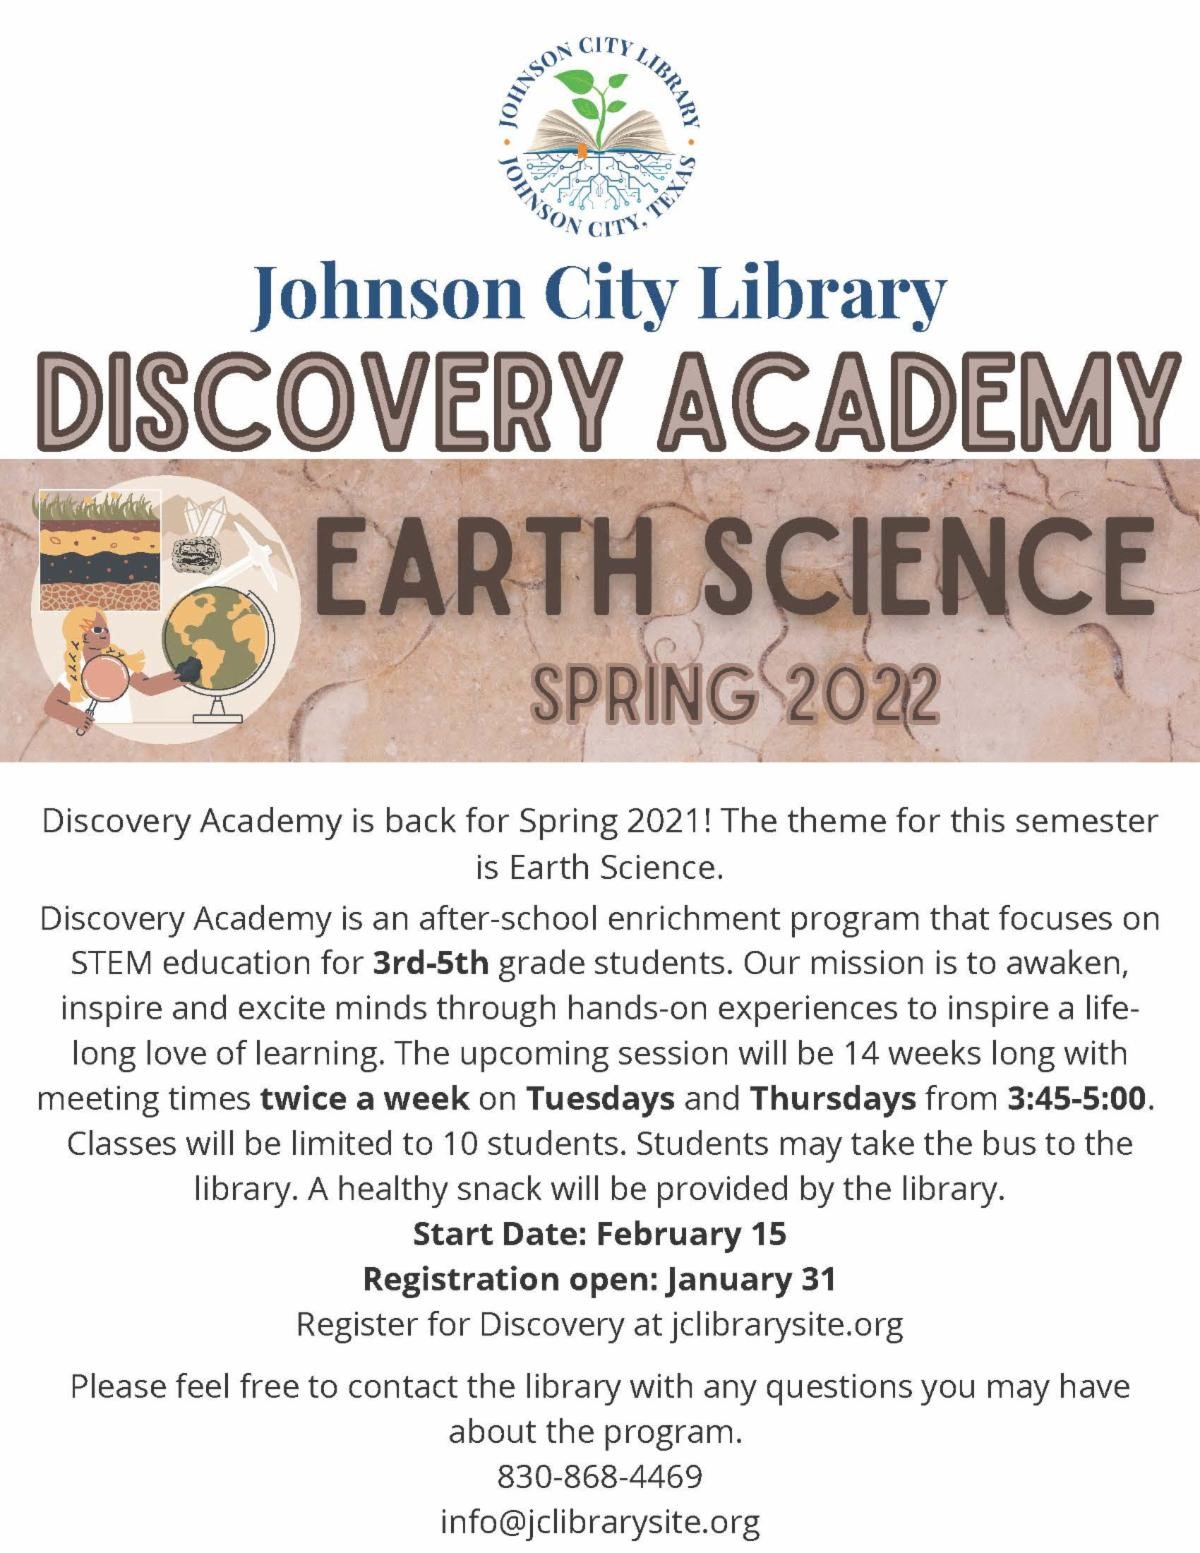 Discovery Academy